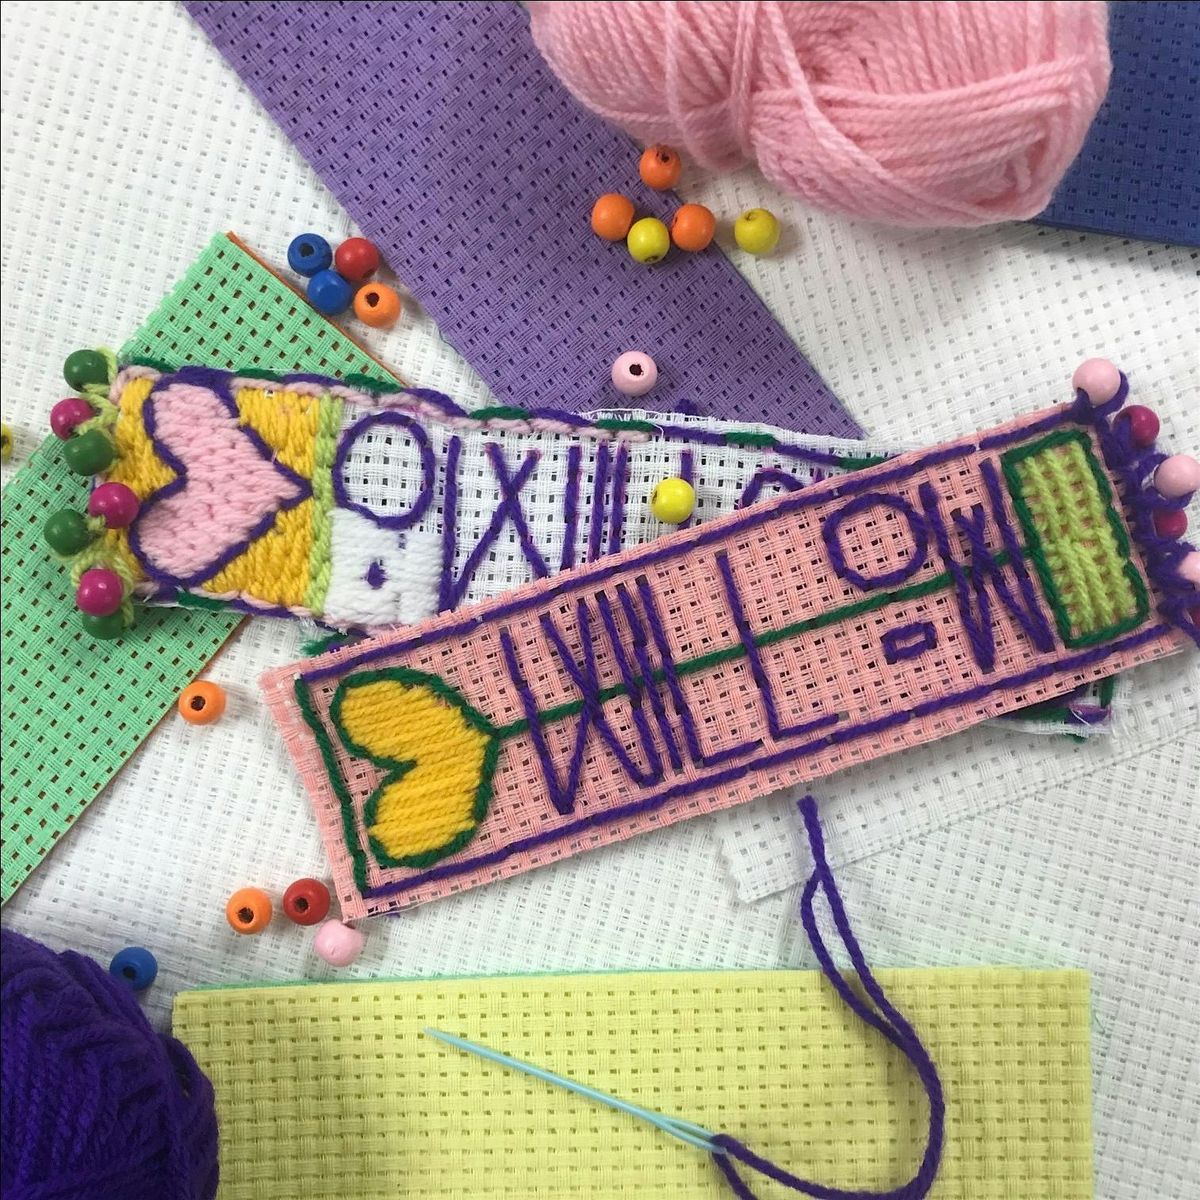 Summer Holiday Family Activity: Make an Embroidered Bookmark